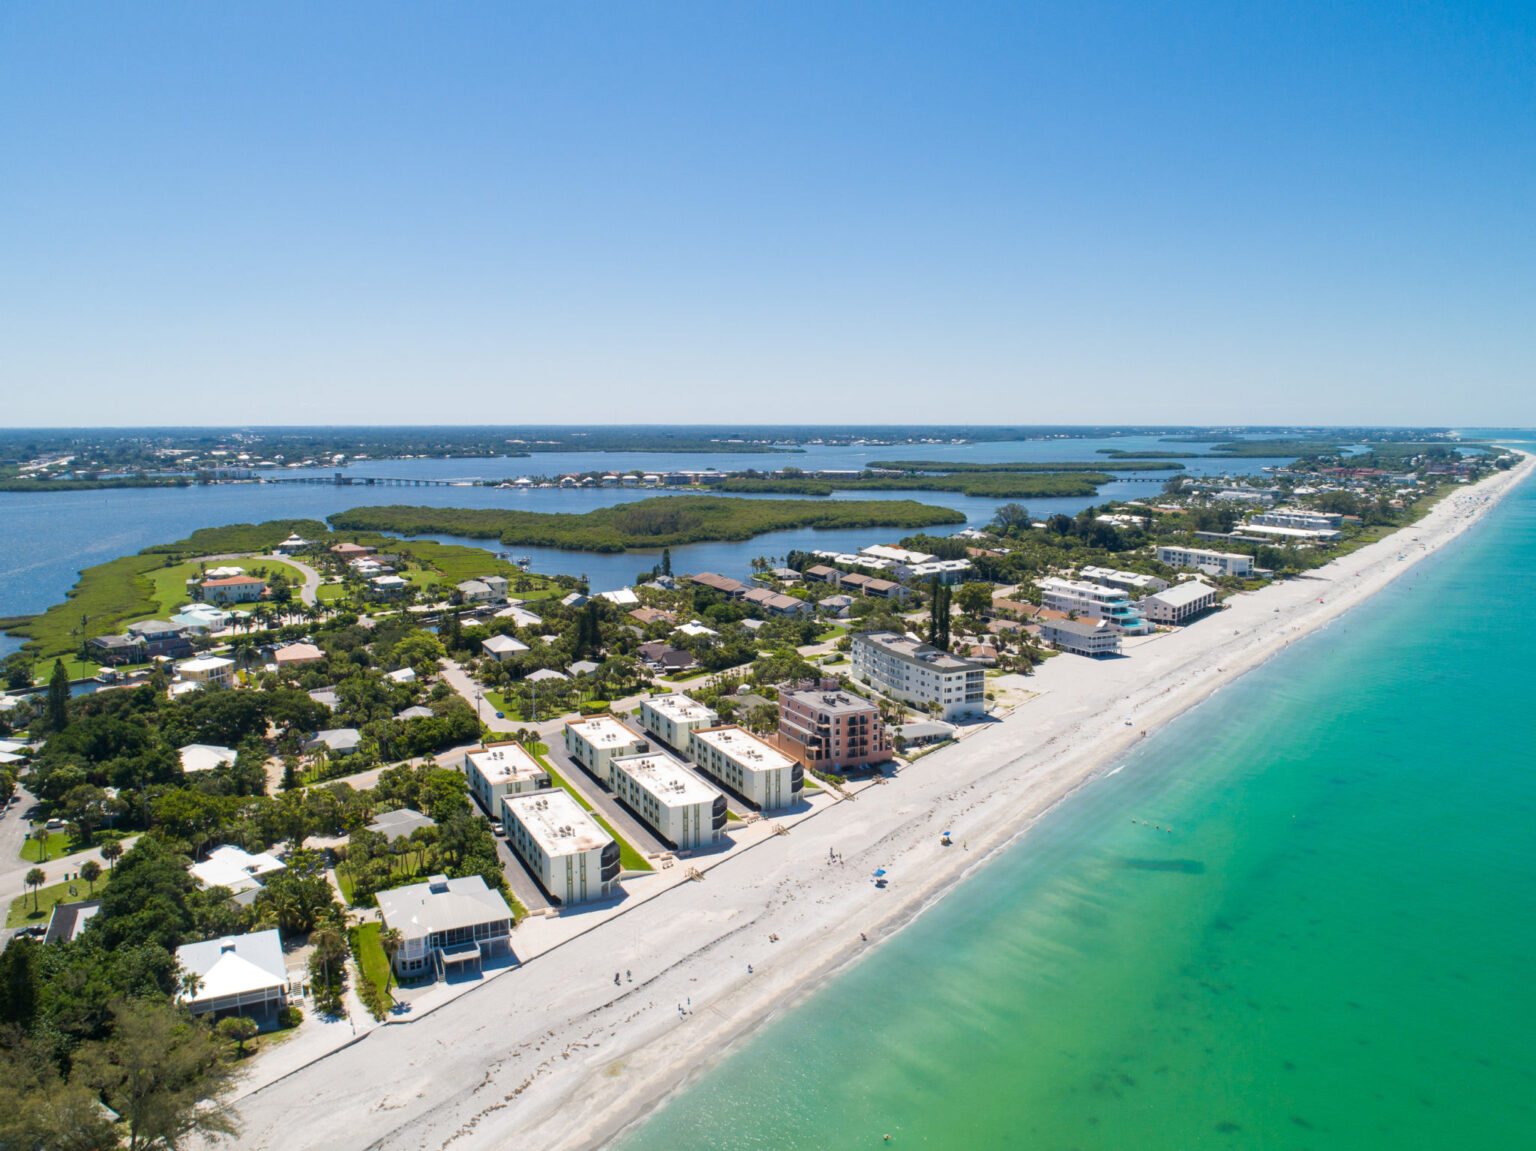 aerial view from ocean with beach and La Coquina buildings in foreground